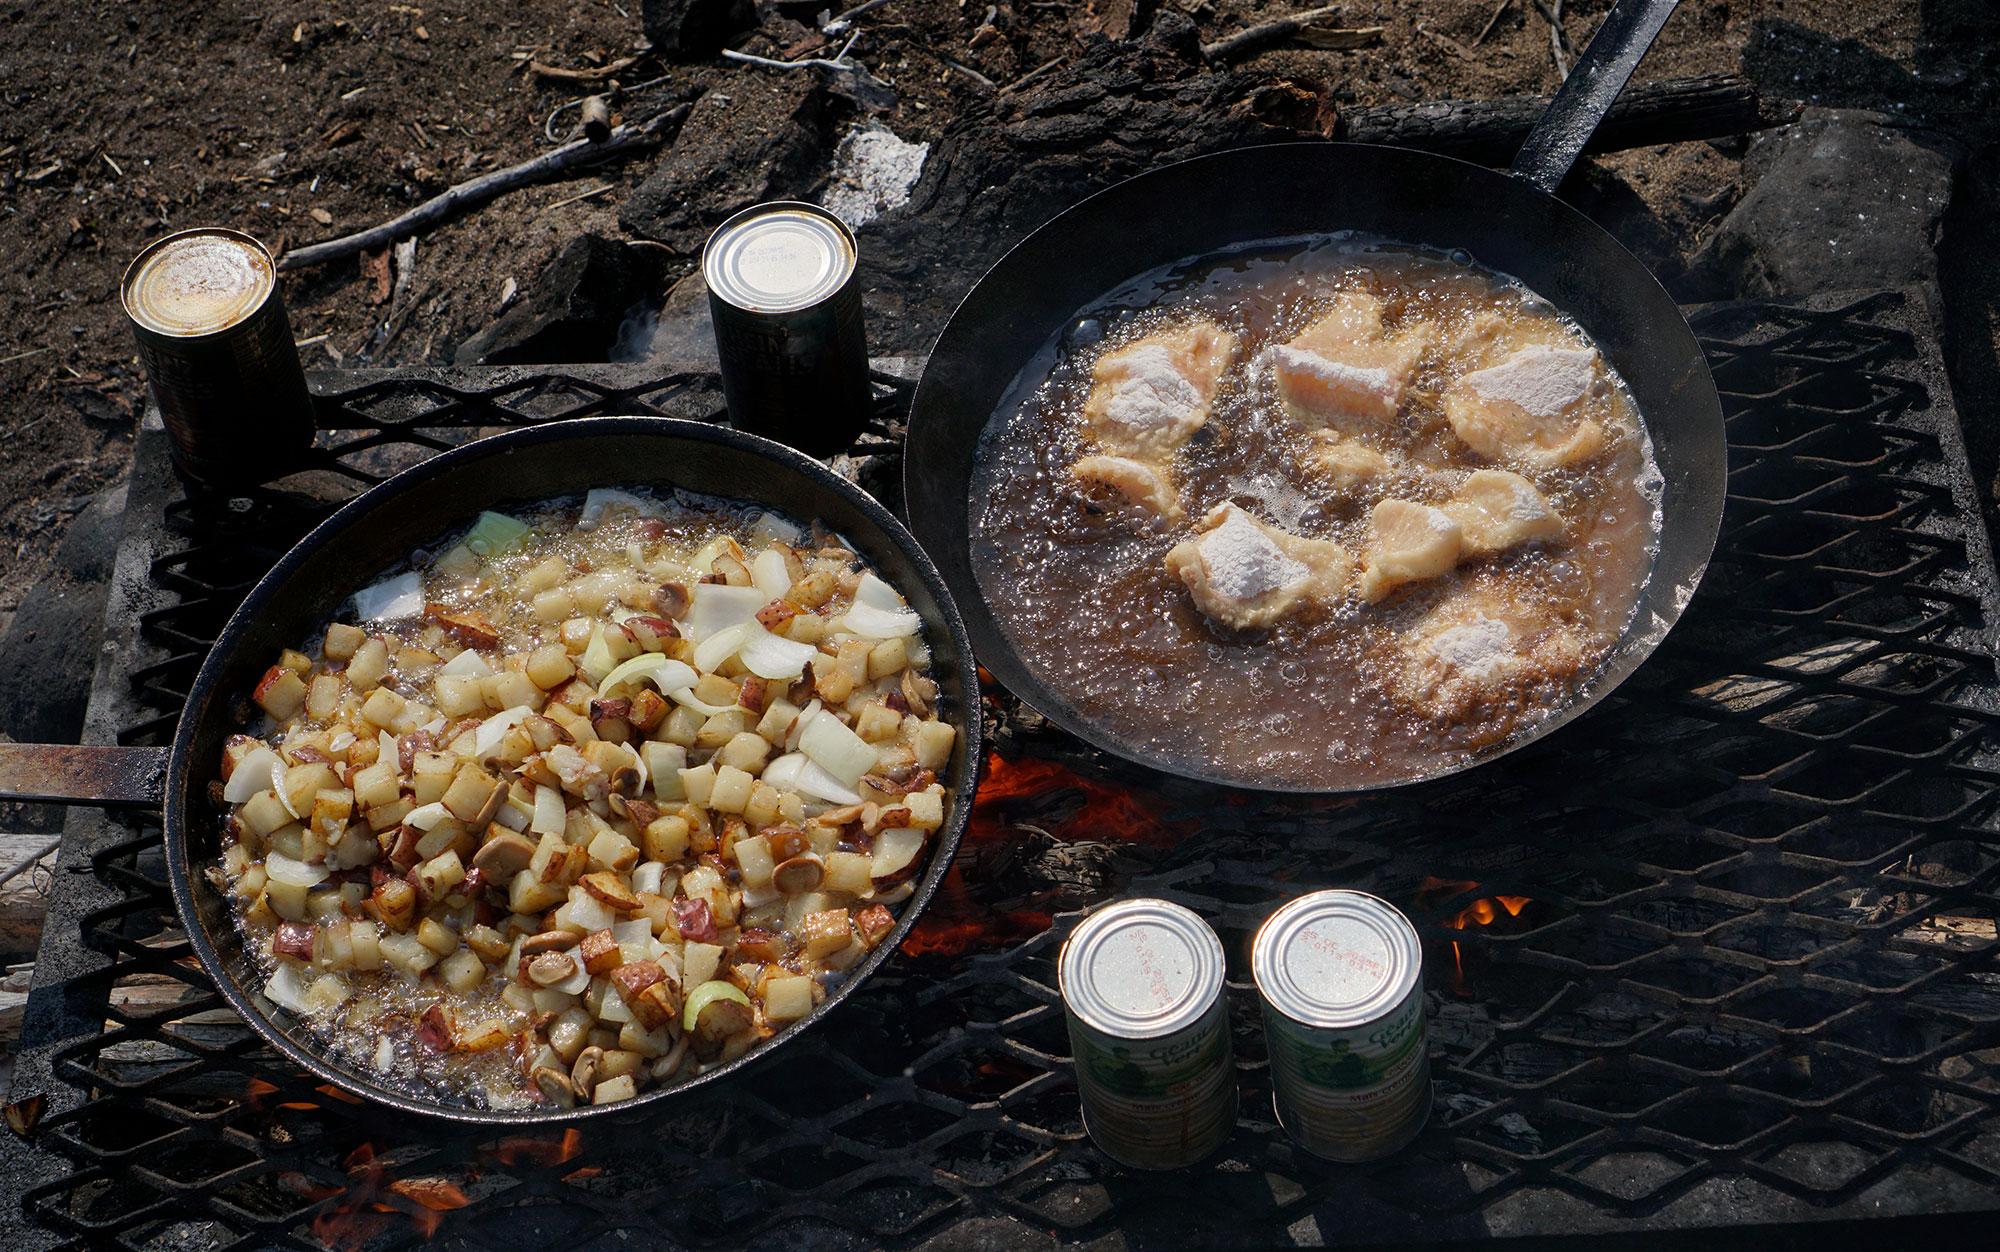 Camping food ideas are endless.